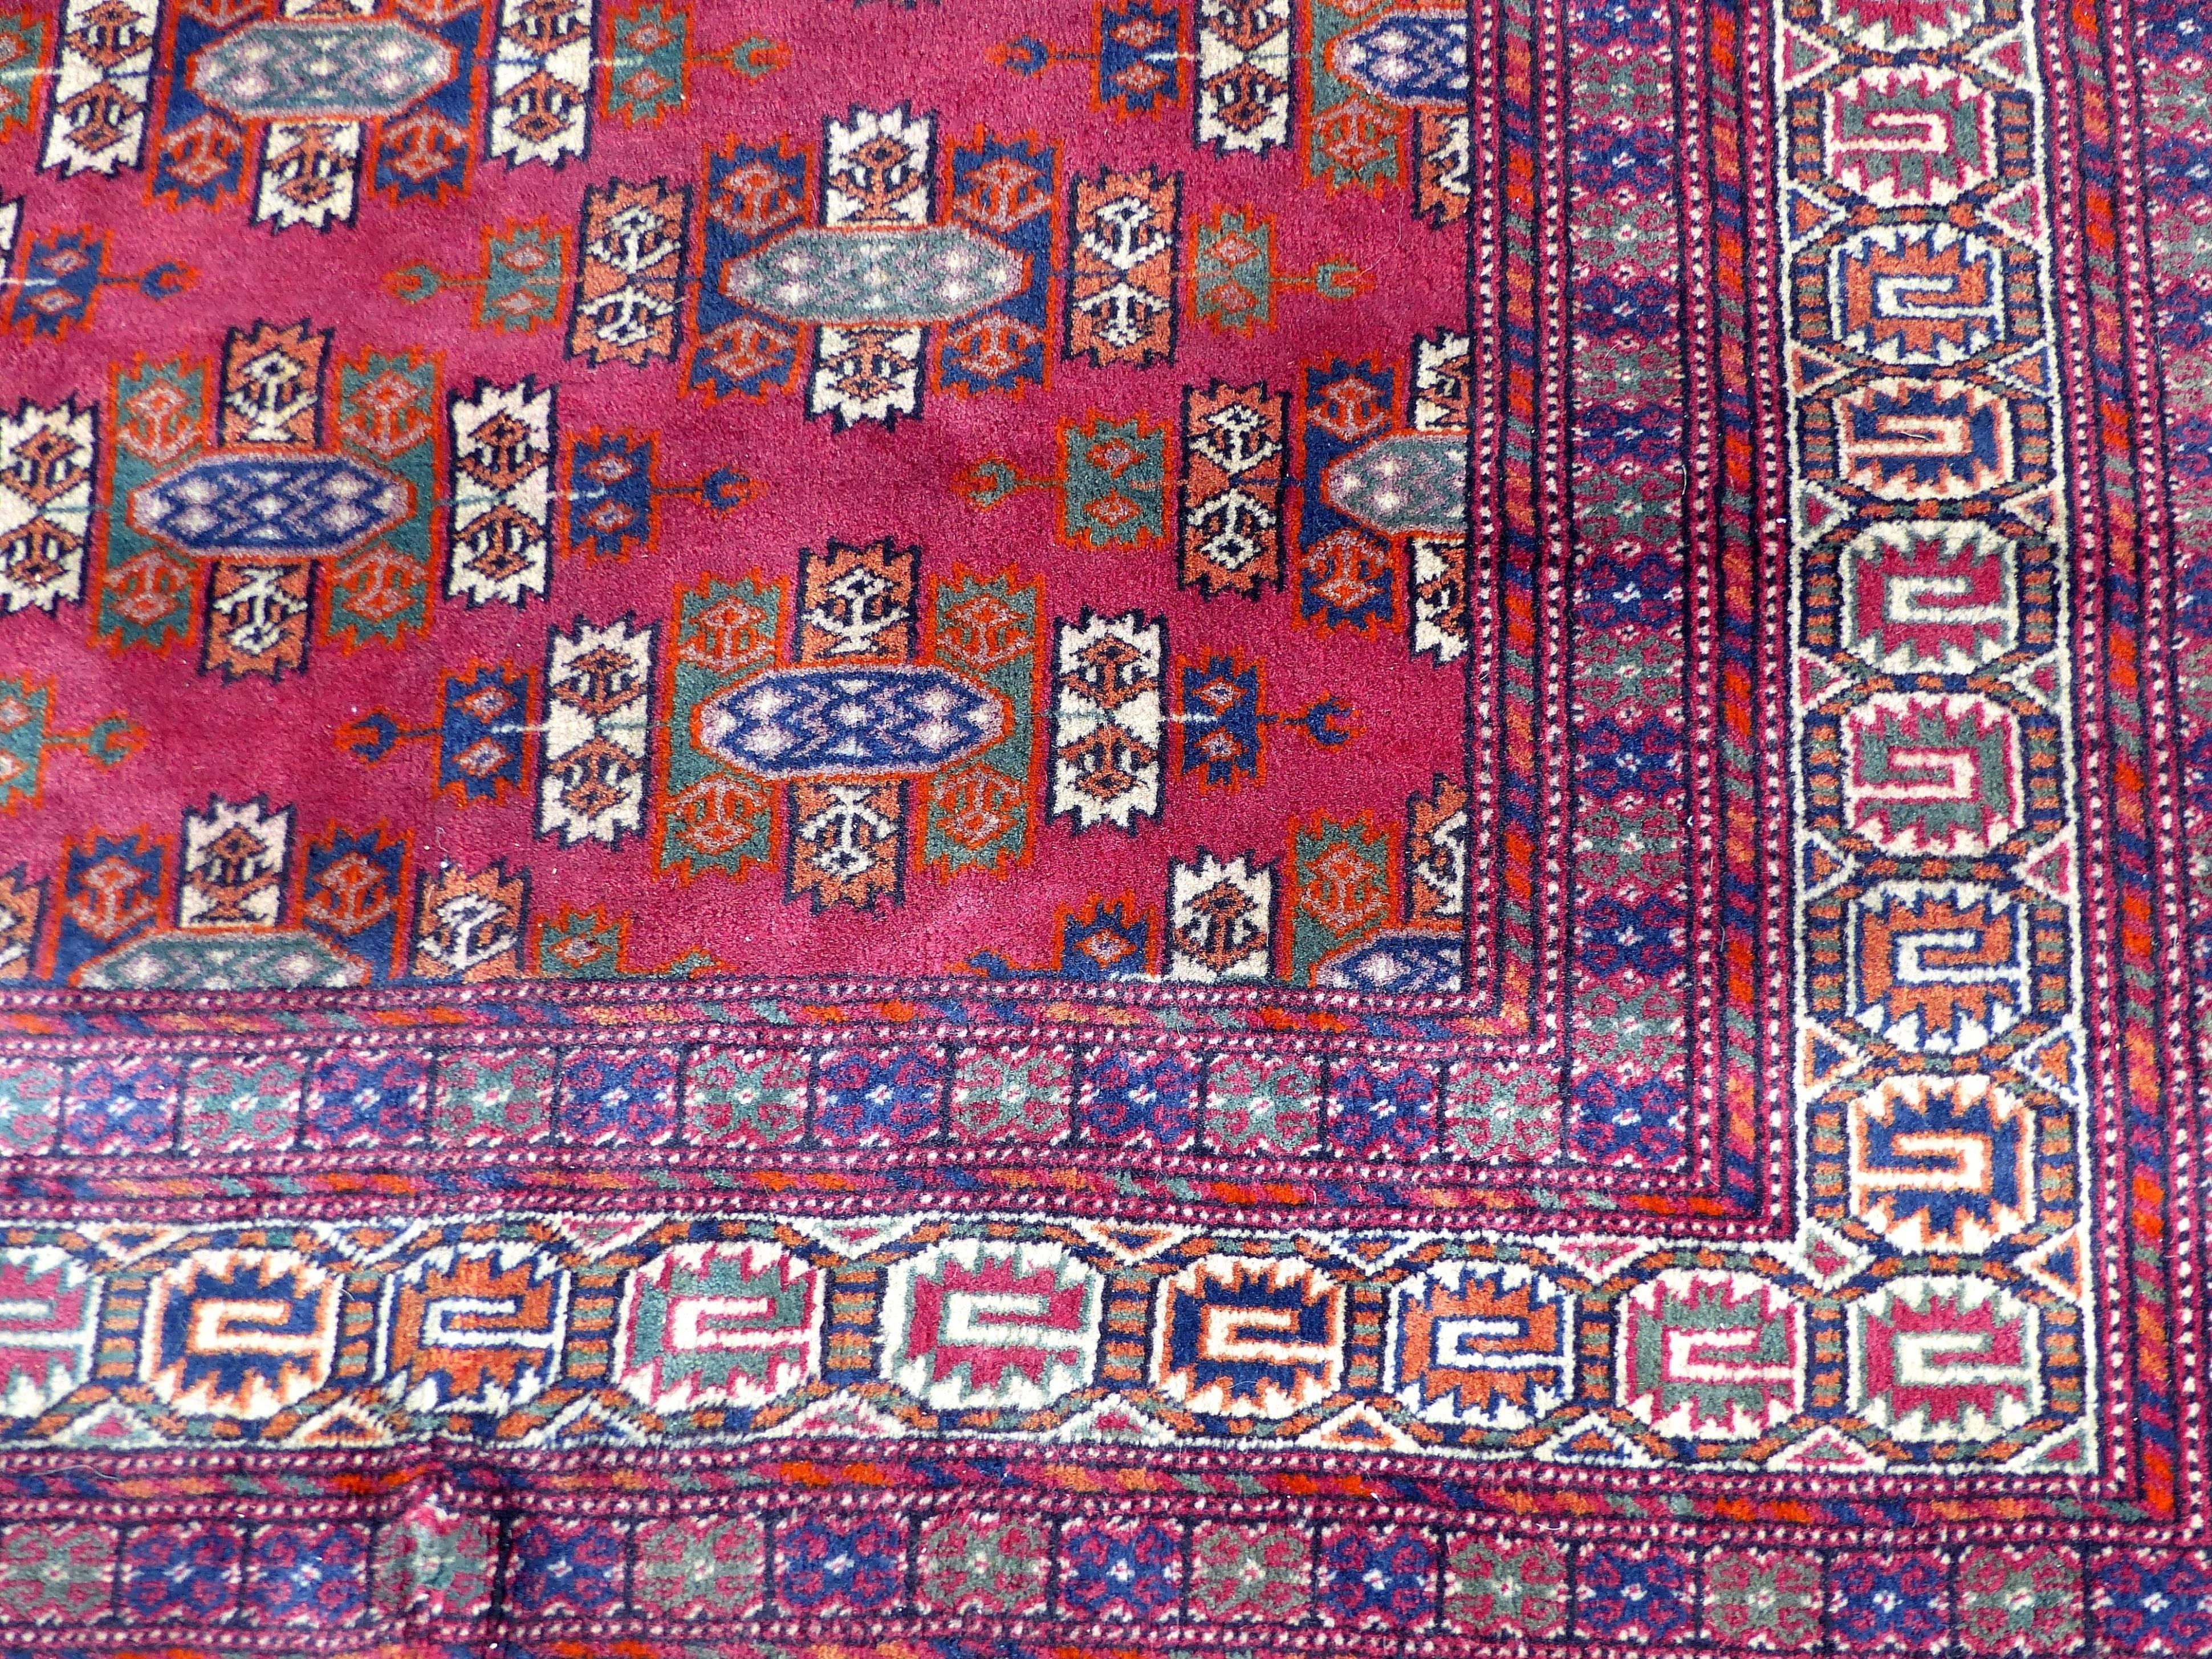 Handwoven Turkoman Armenian Wool and Silk Carpet, Mid-20th Century

Offered for sale is a fine quality Armenian Turkoman wool and silk handwoven rug with vibrant colors, detailed pattern and fringe.